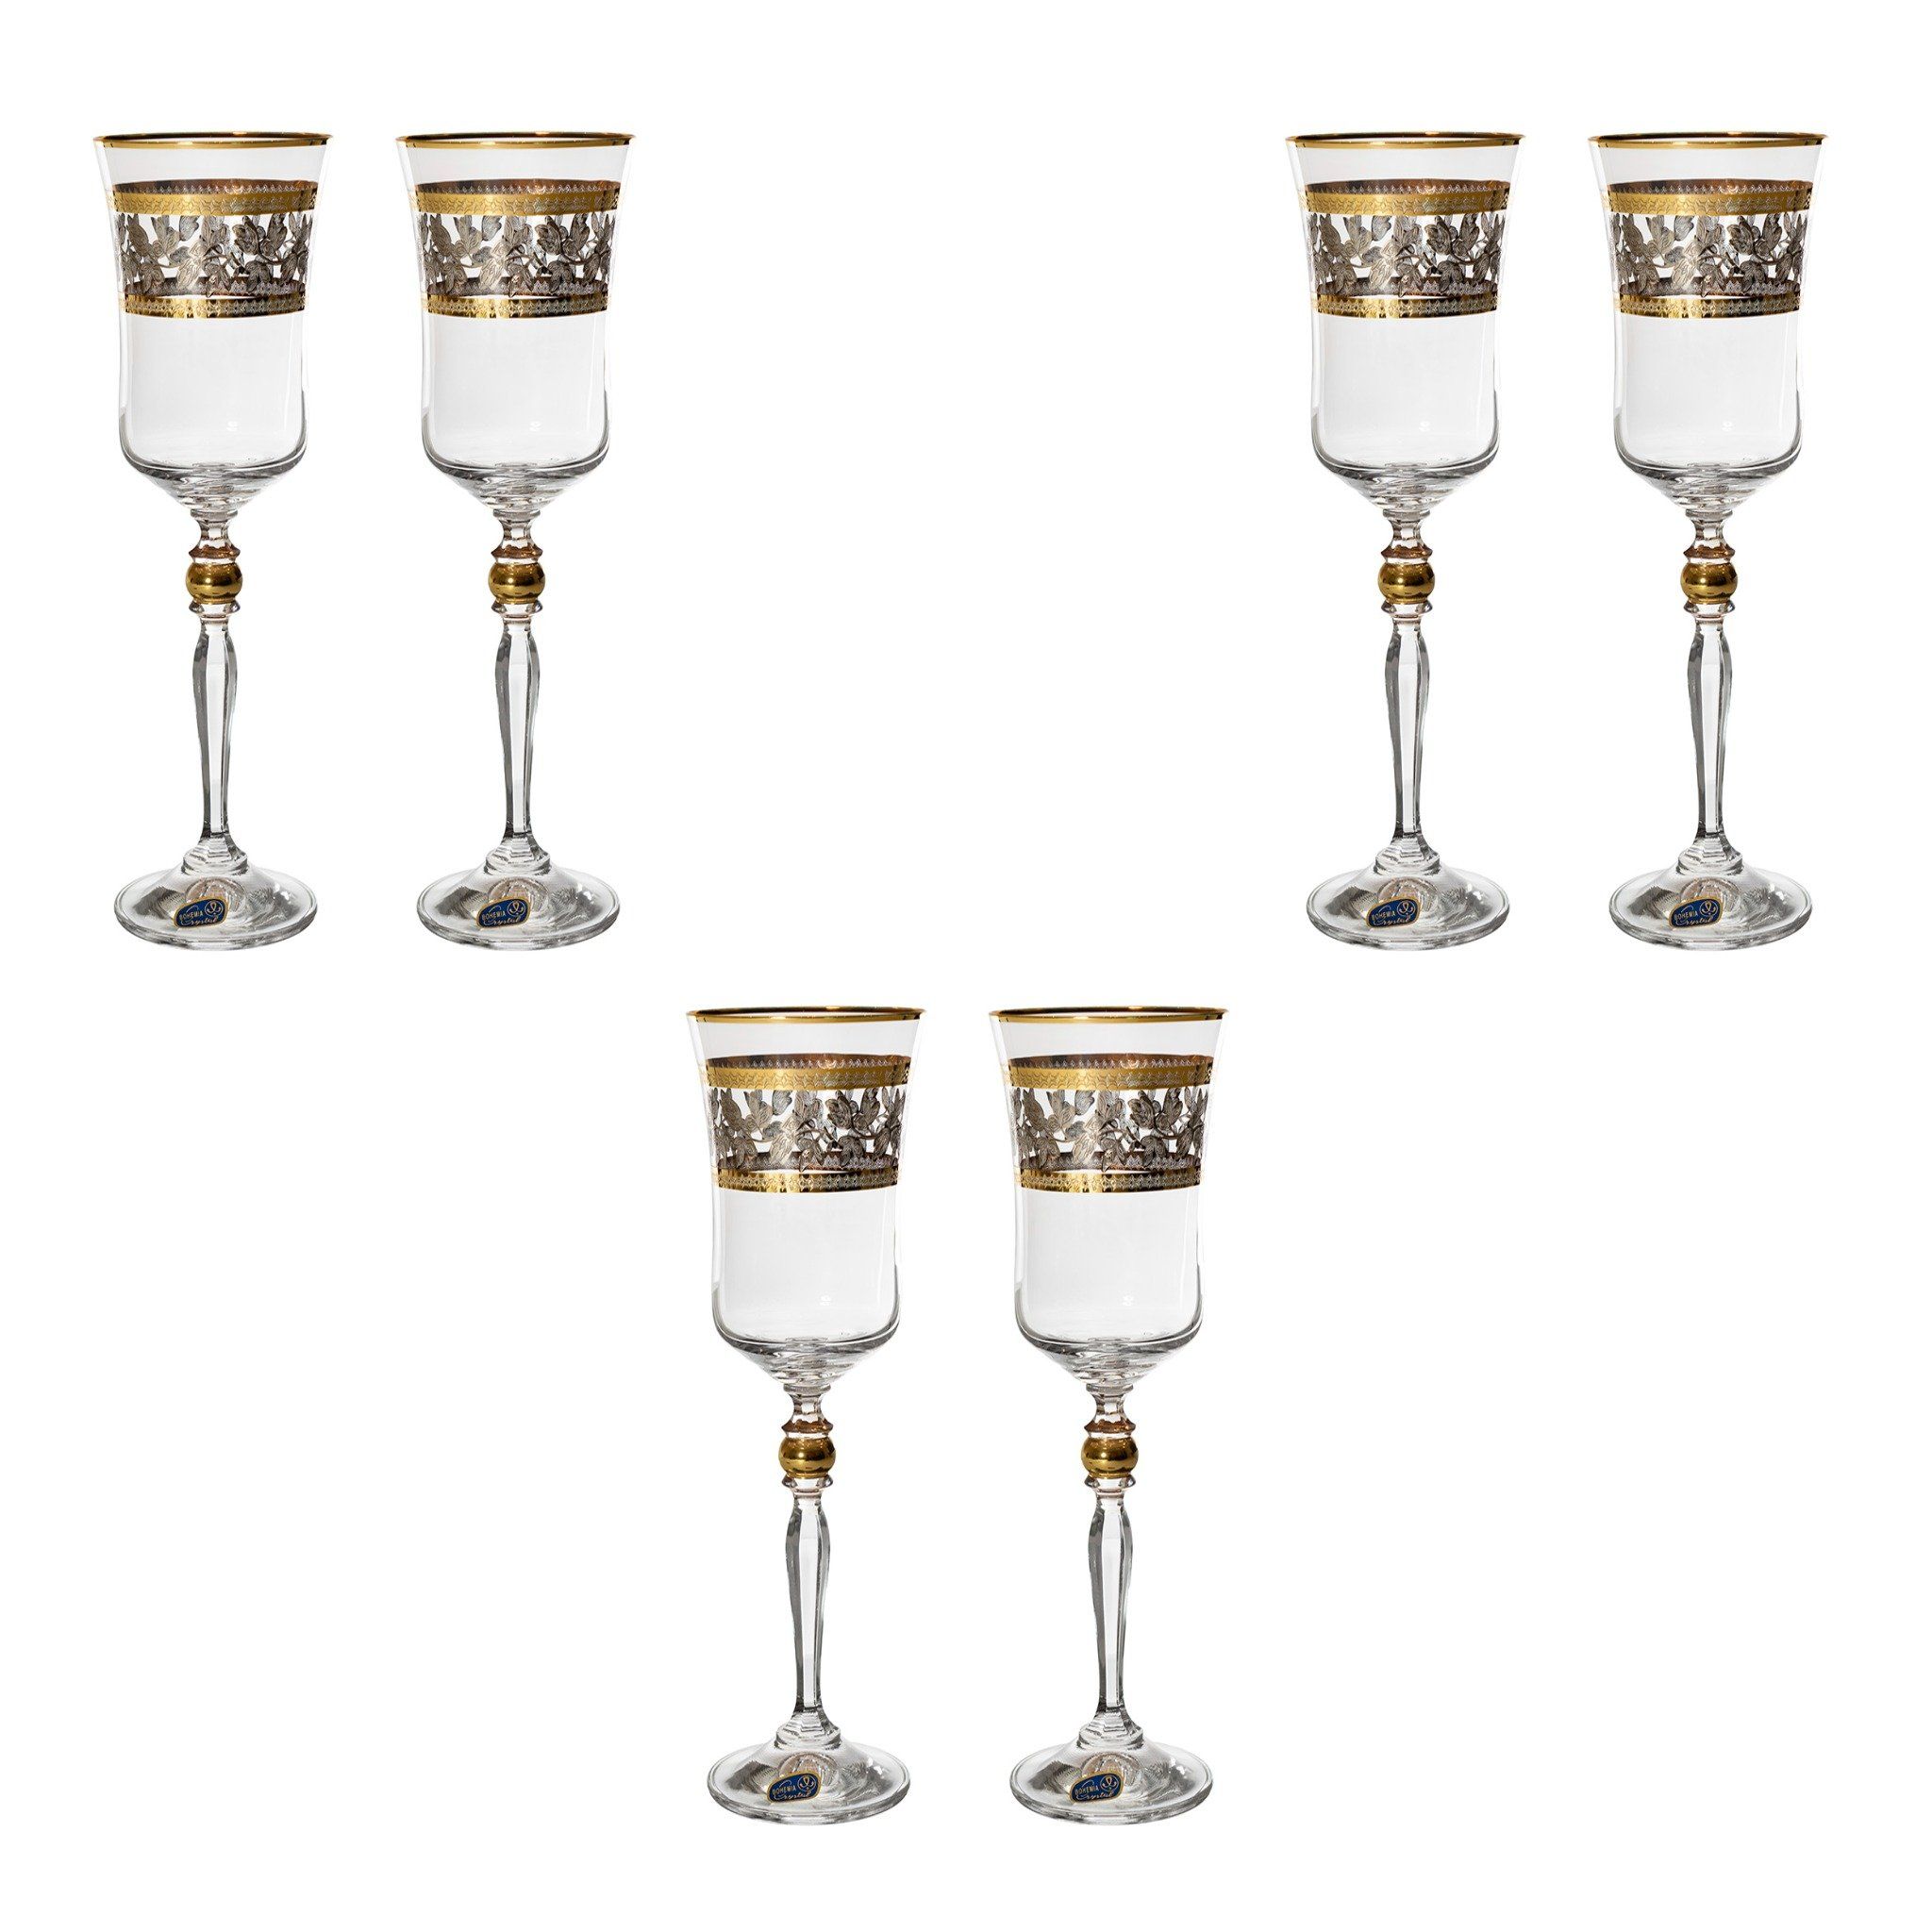 Bohemia Crystal - Goblet Glass Set 6 Pieces - Gold & Silver - 220ml - 39000623